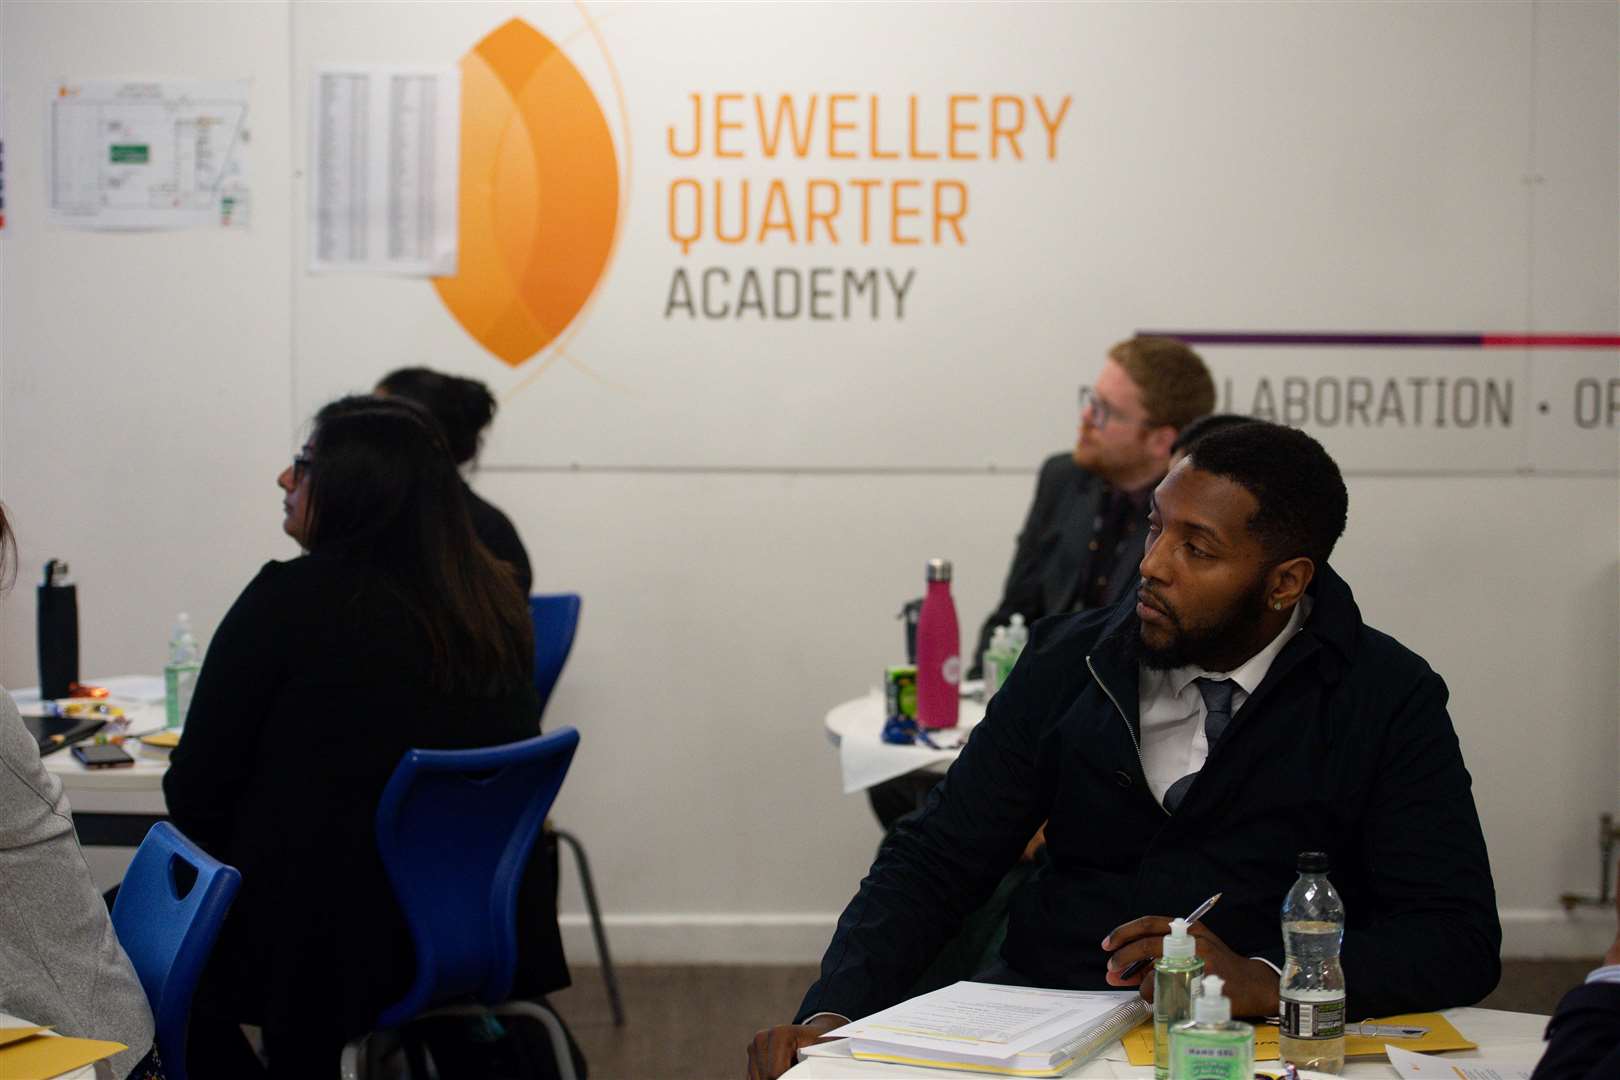 Teacher training takes place at the Jewellery Quarter Academy in Birmingham, ahead of the return of students later in the week (Jacob King/PA)